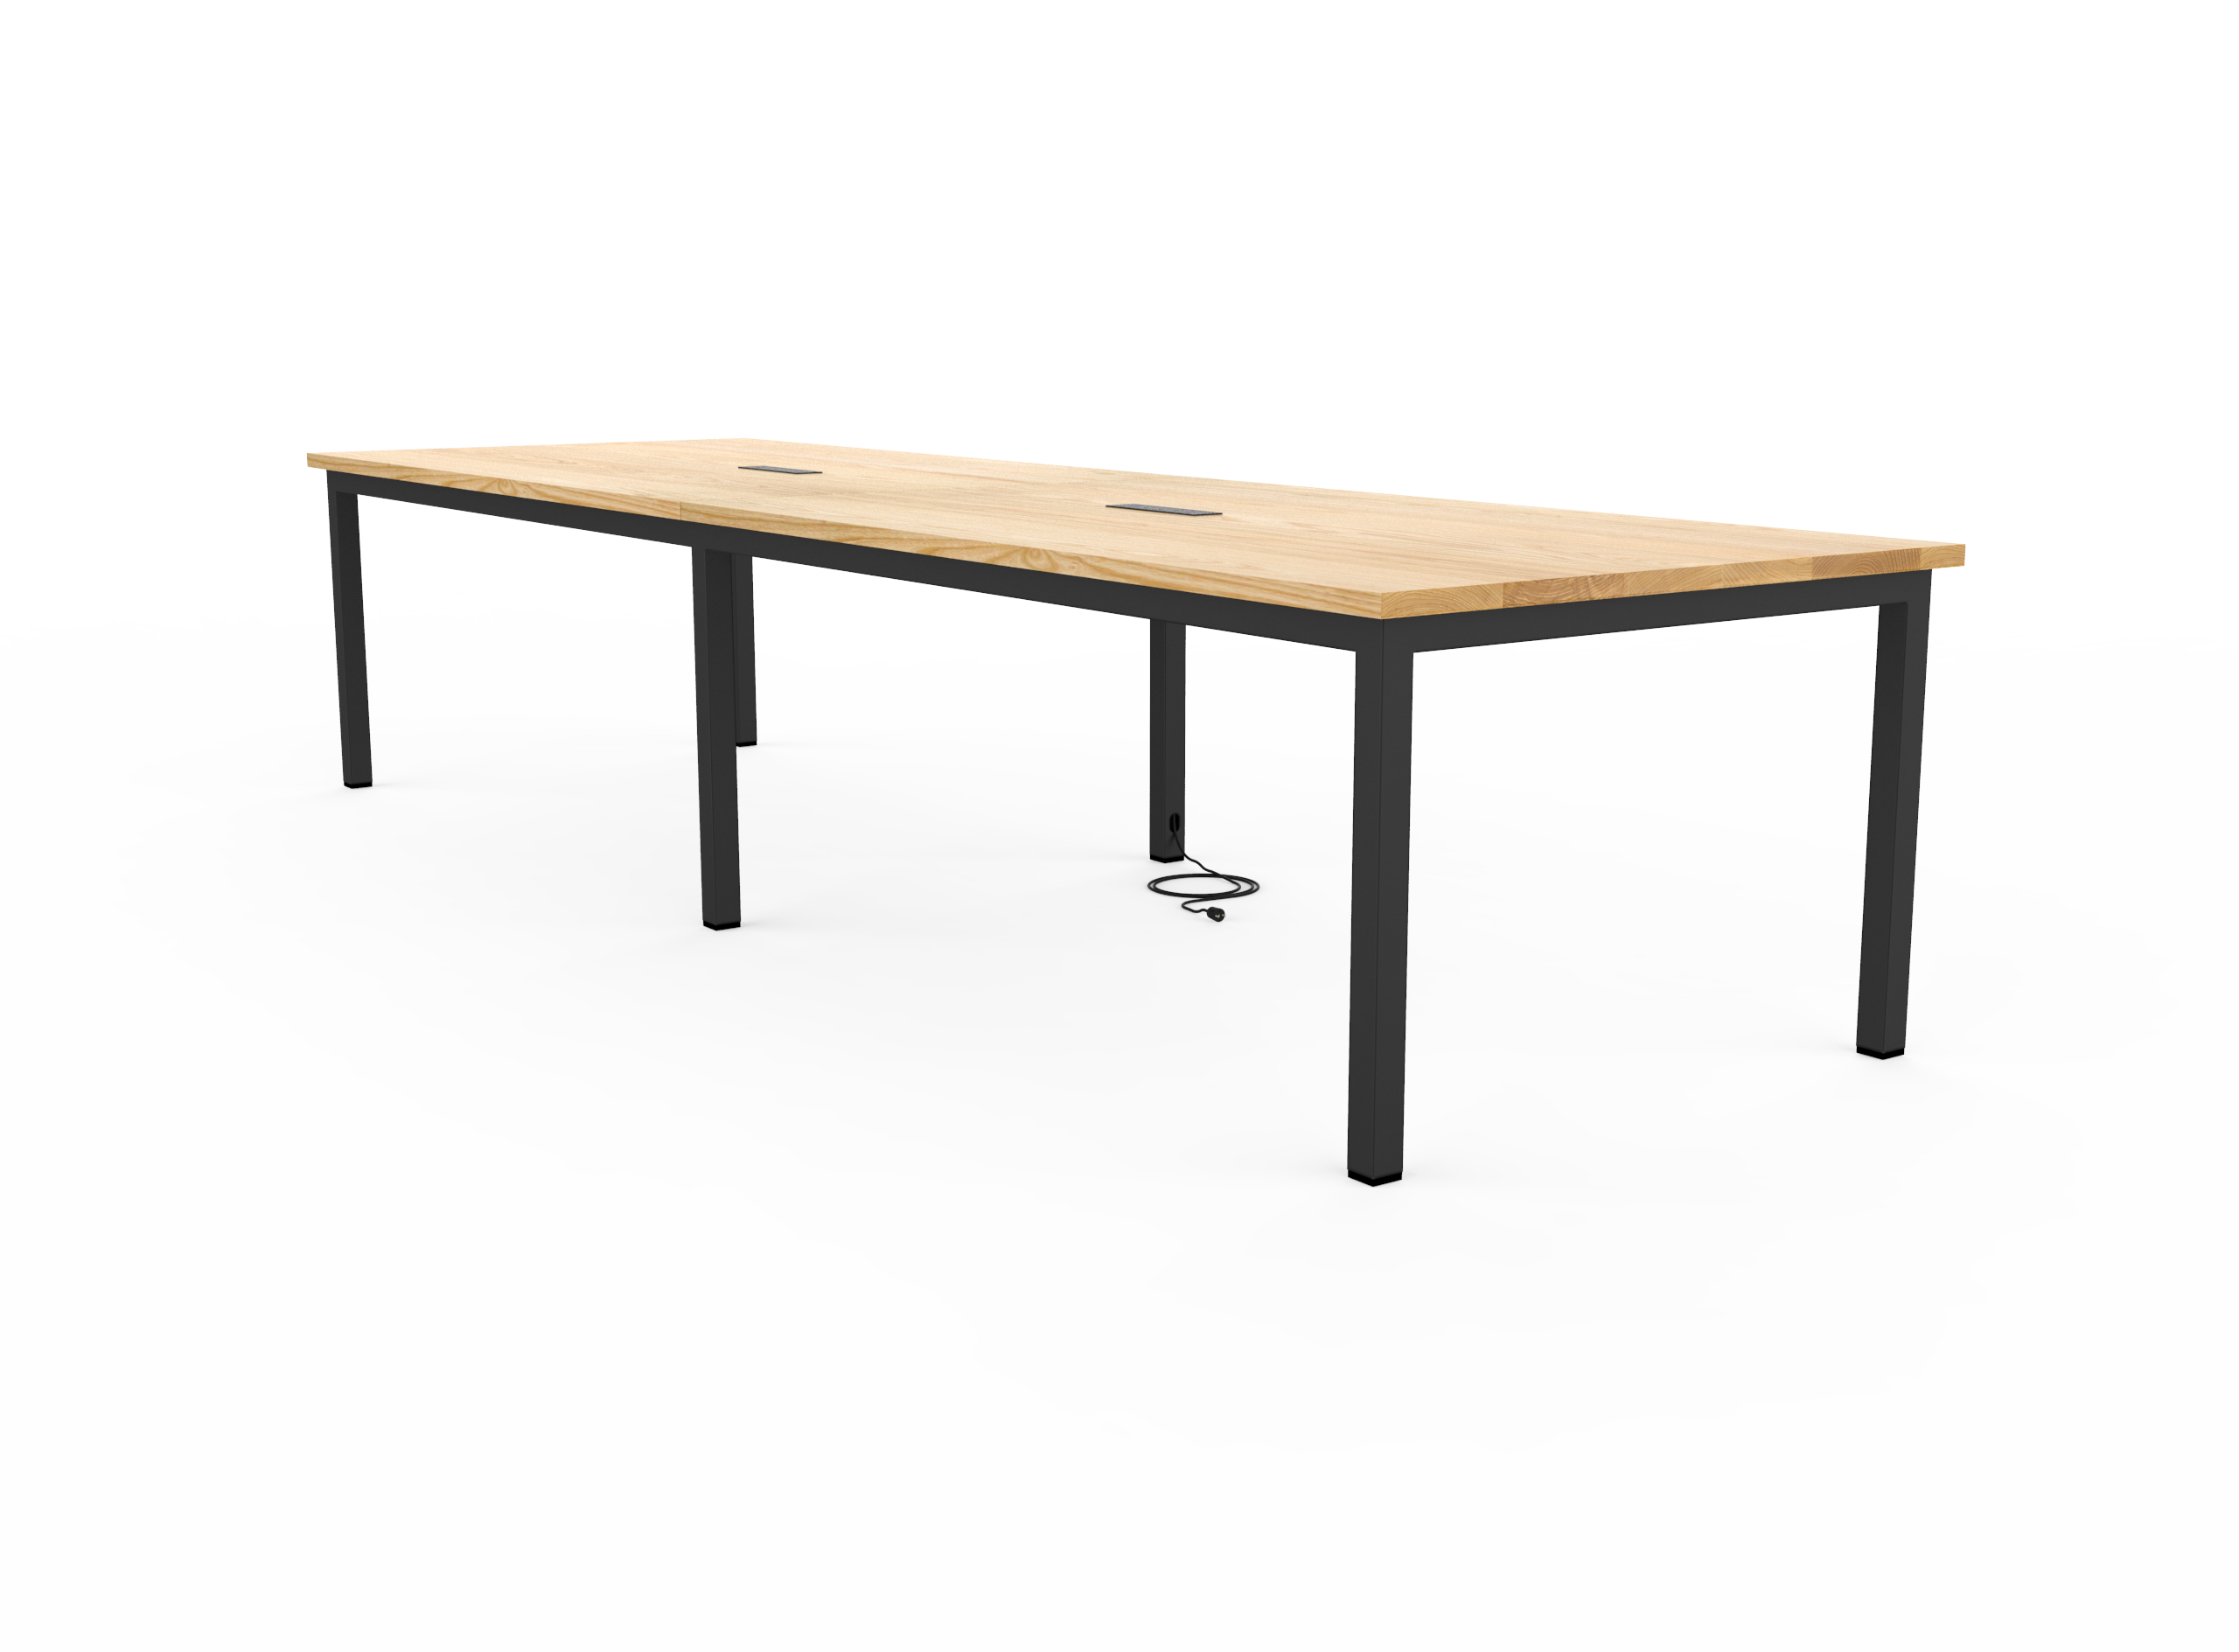 Vermont Farm Table Custom Wood Conference S200 003 Ash 